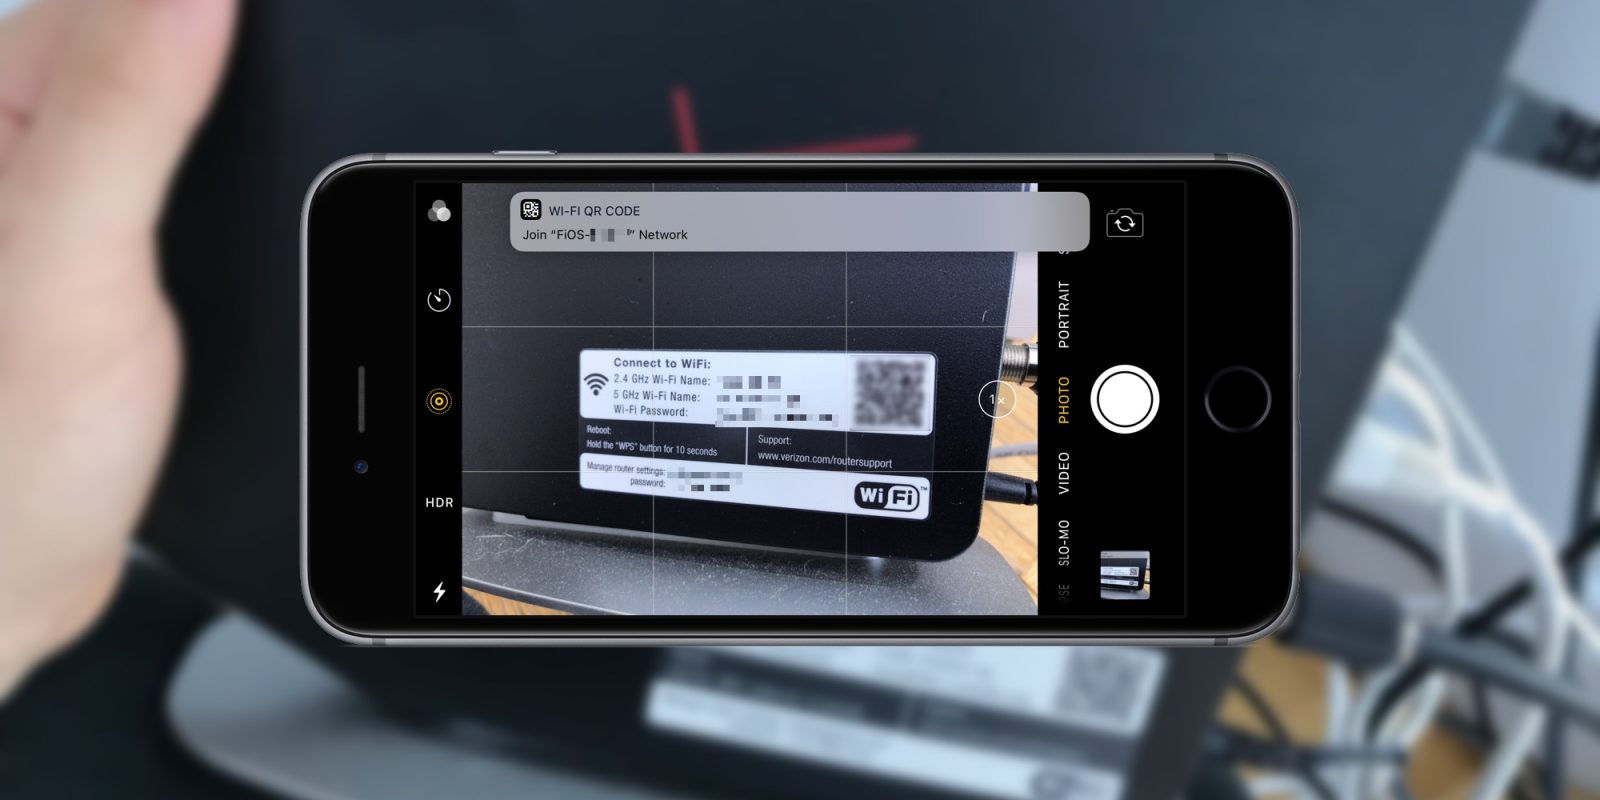 iPhone: How to scan QR codes with iOS 11 - 9to5Mac